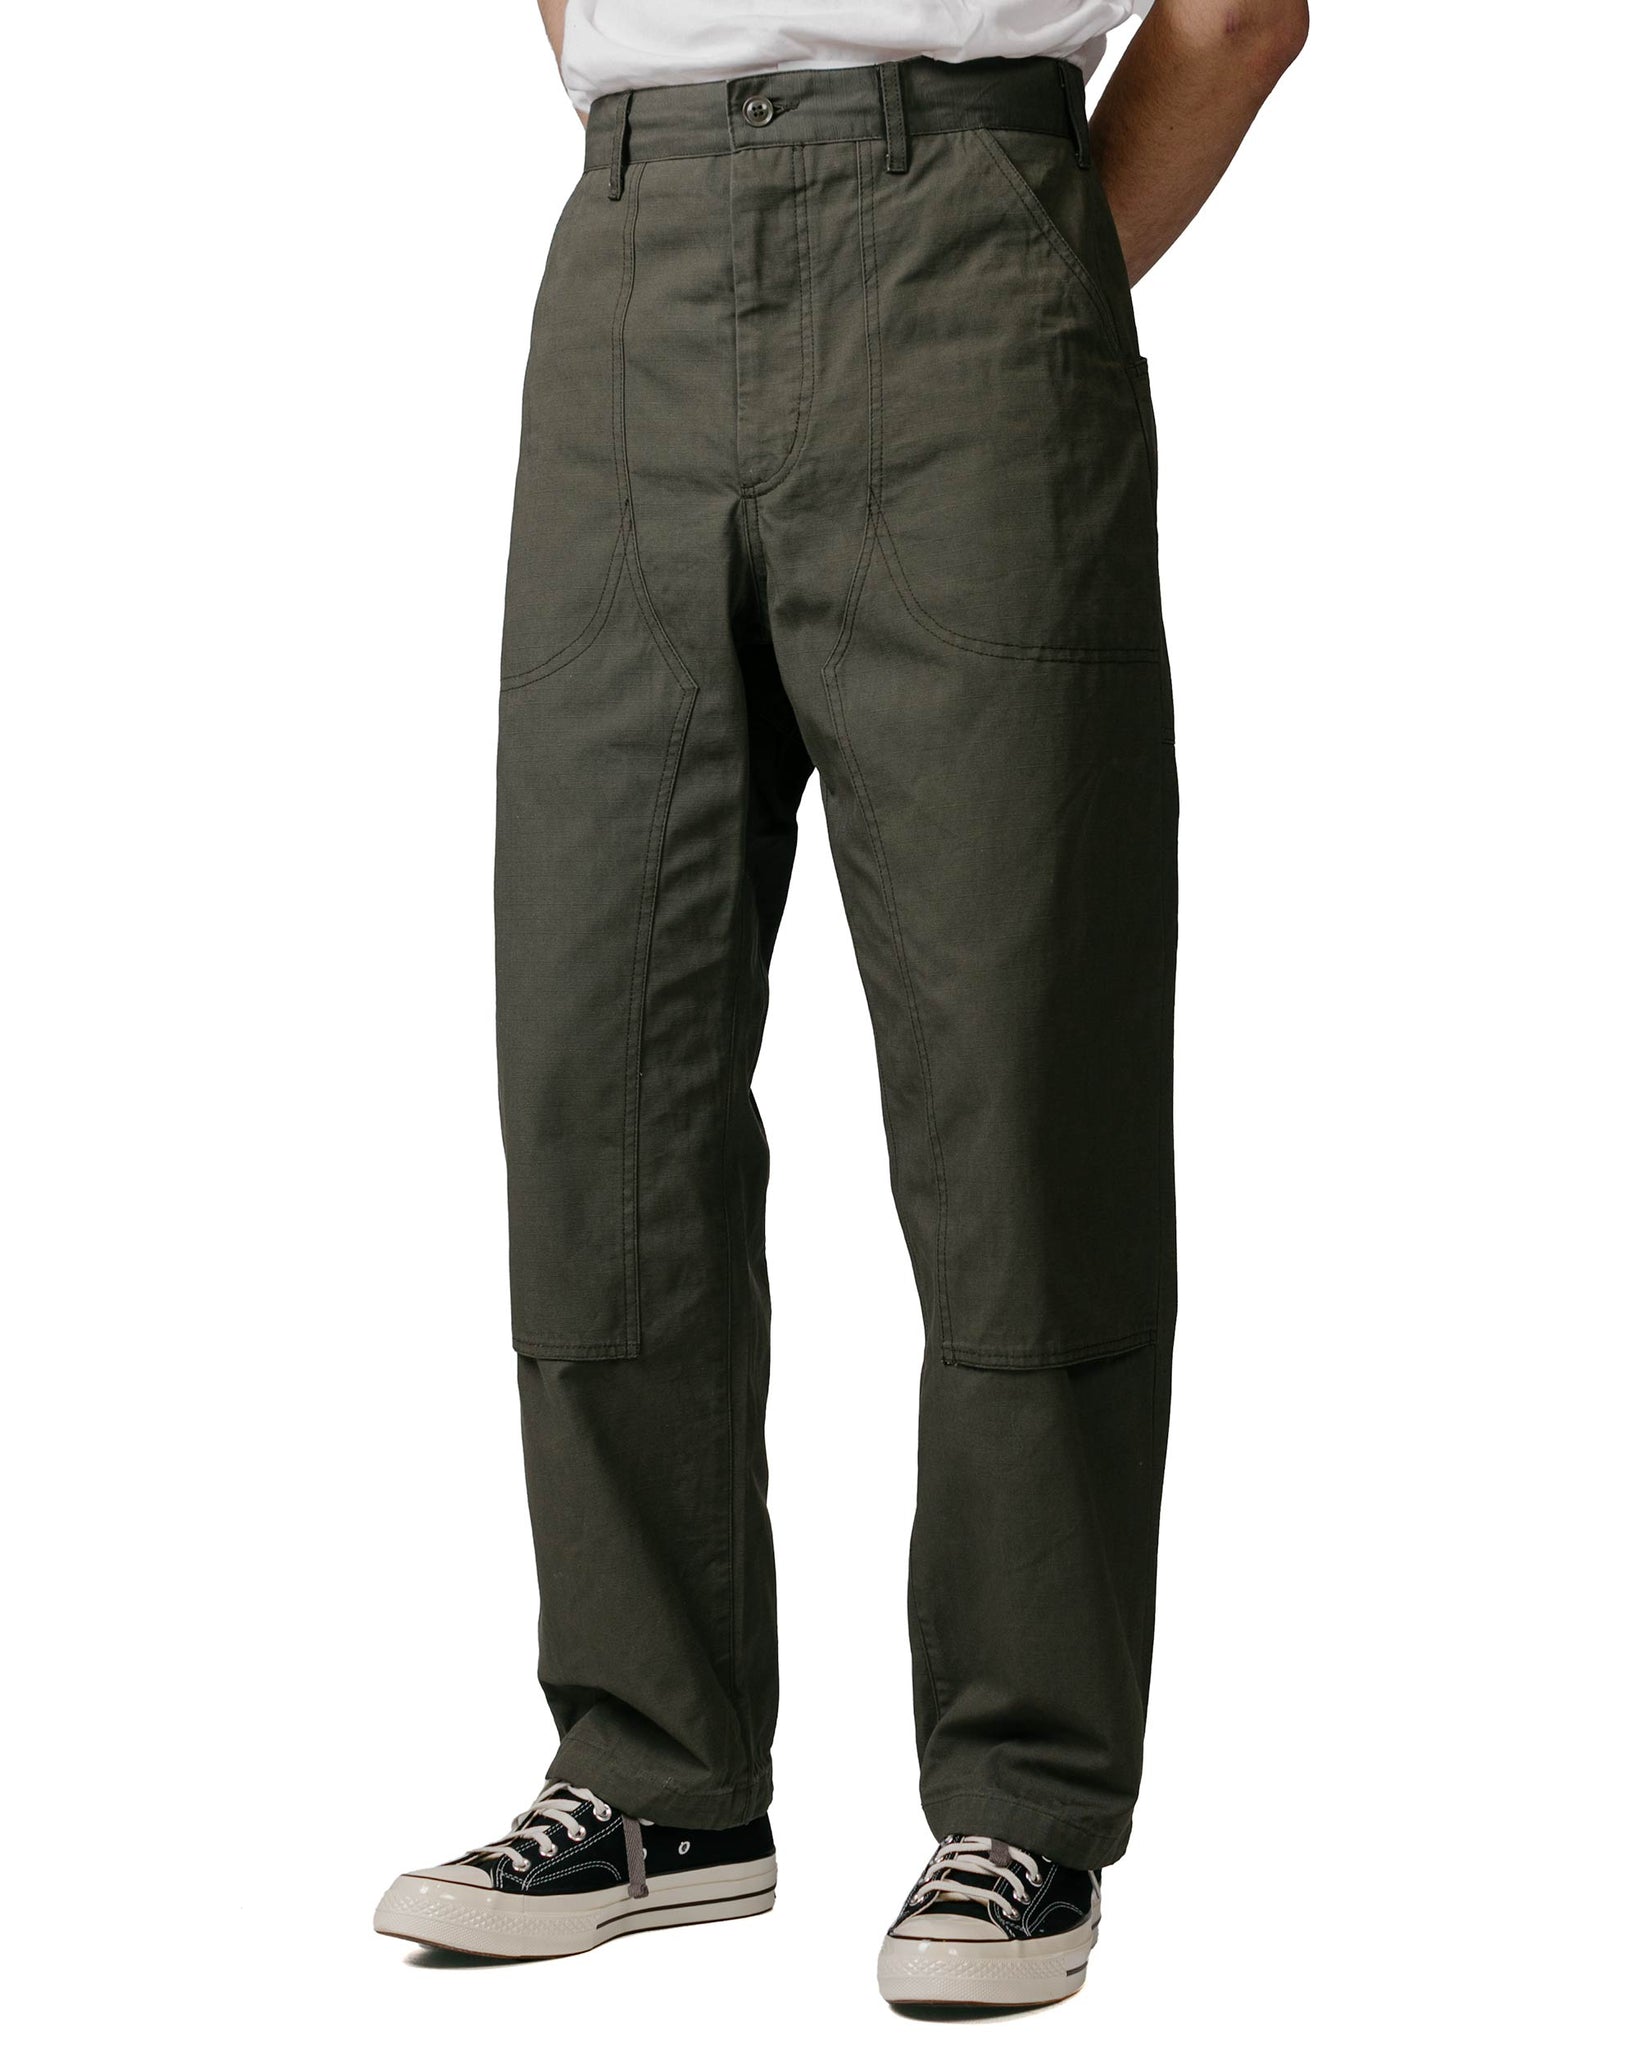 Engineered Garments Climbing Pant Olive Heavyweight Cotton Ripstop Model Front